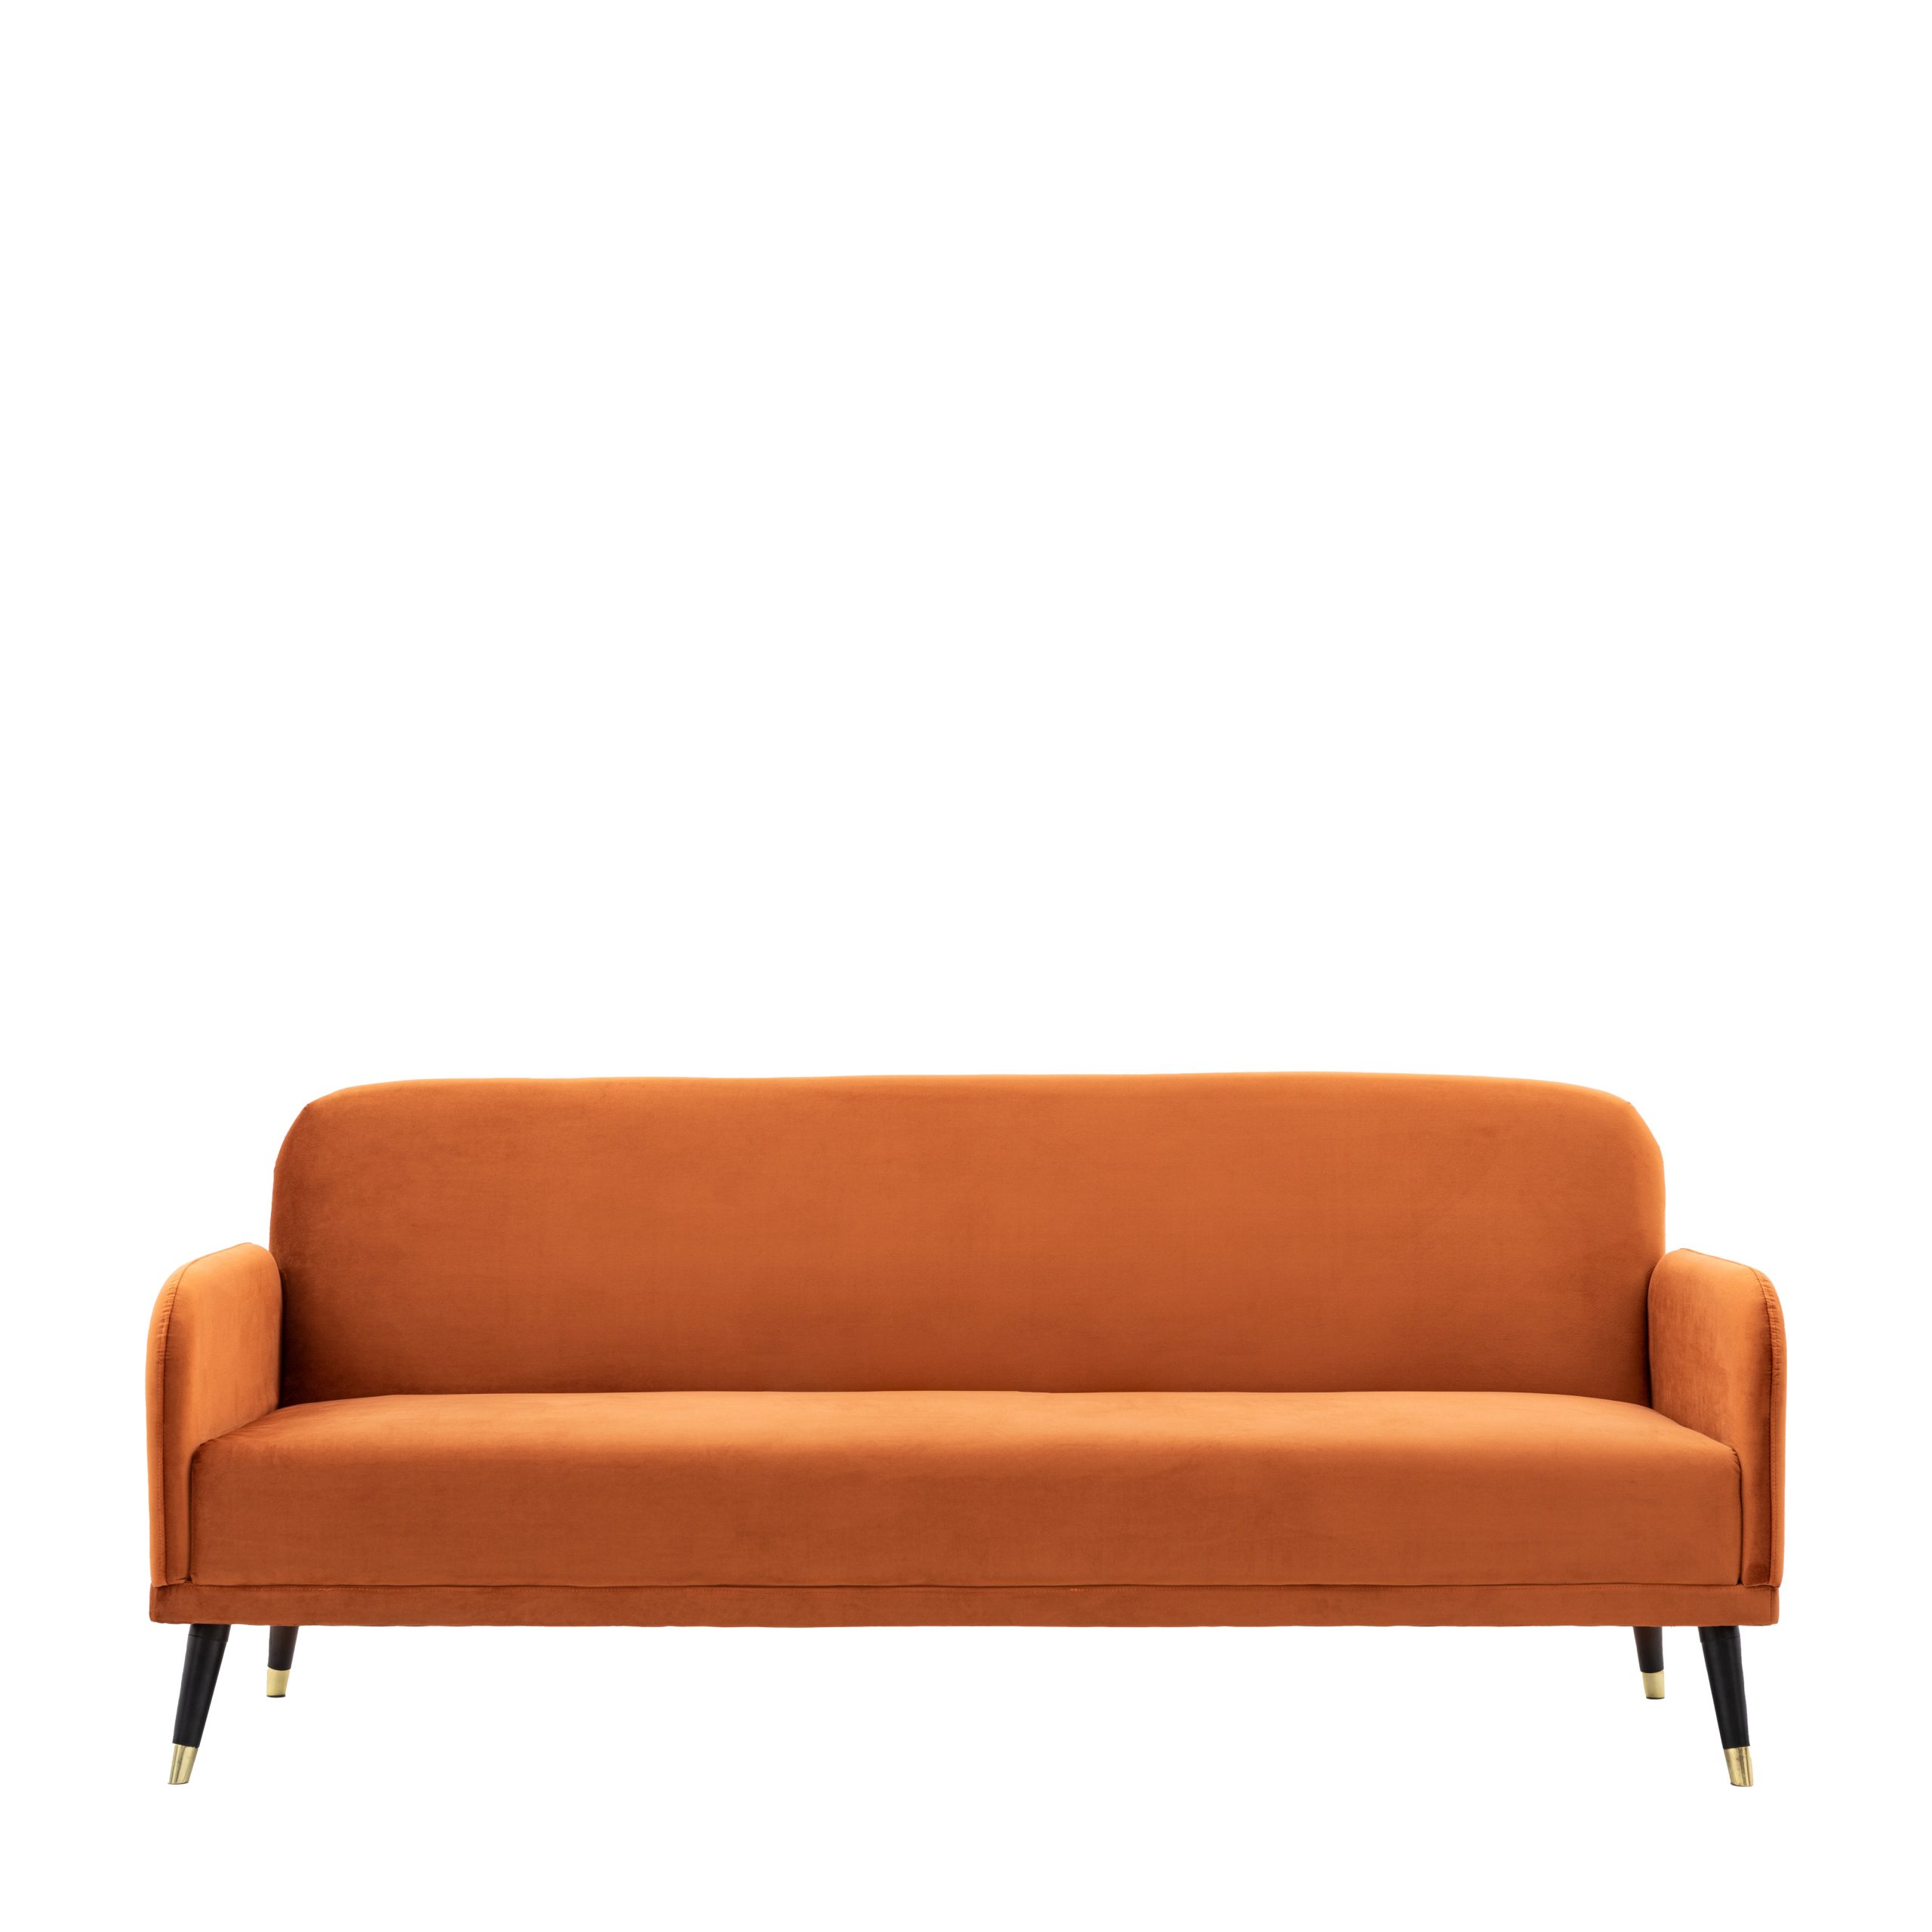 Gallery Direct Holt Sofa Bed Rust